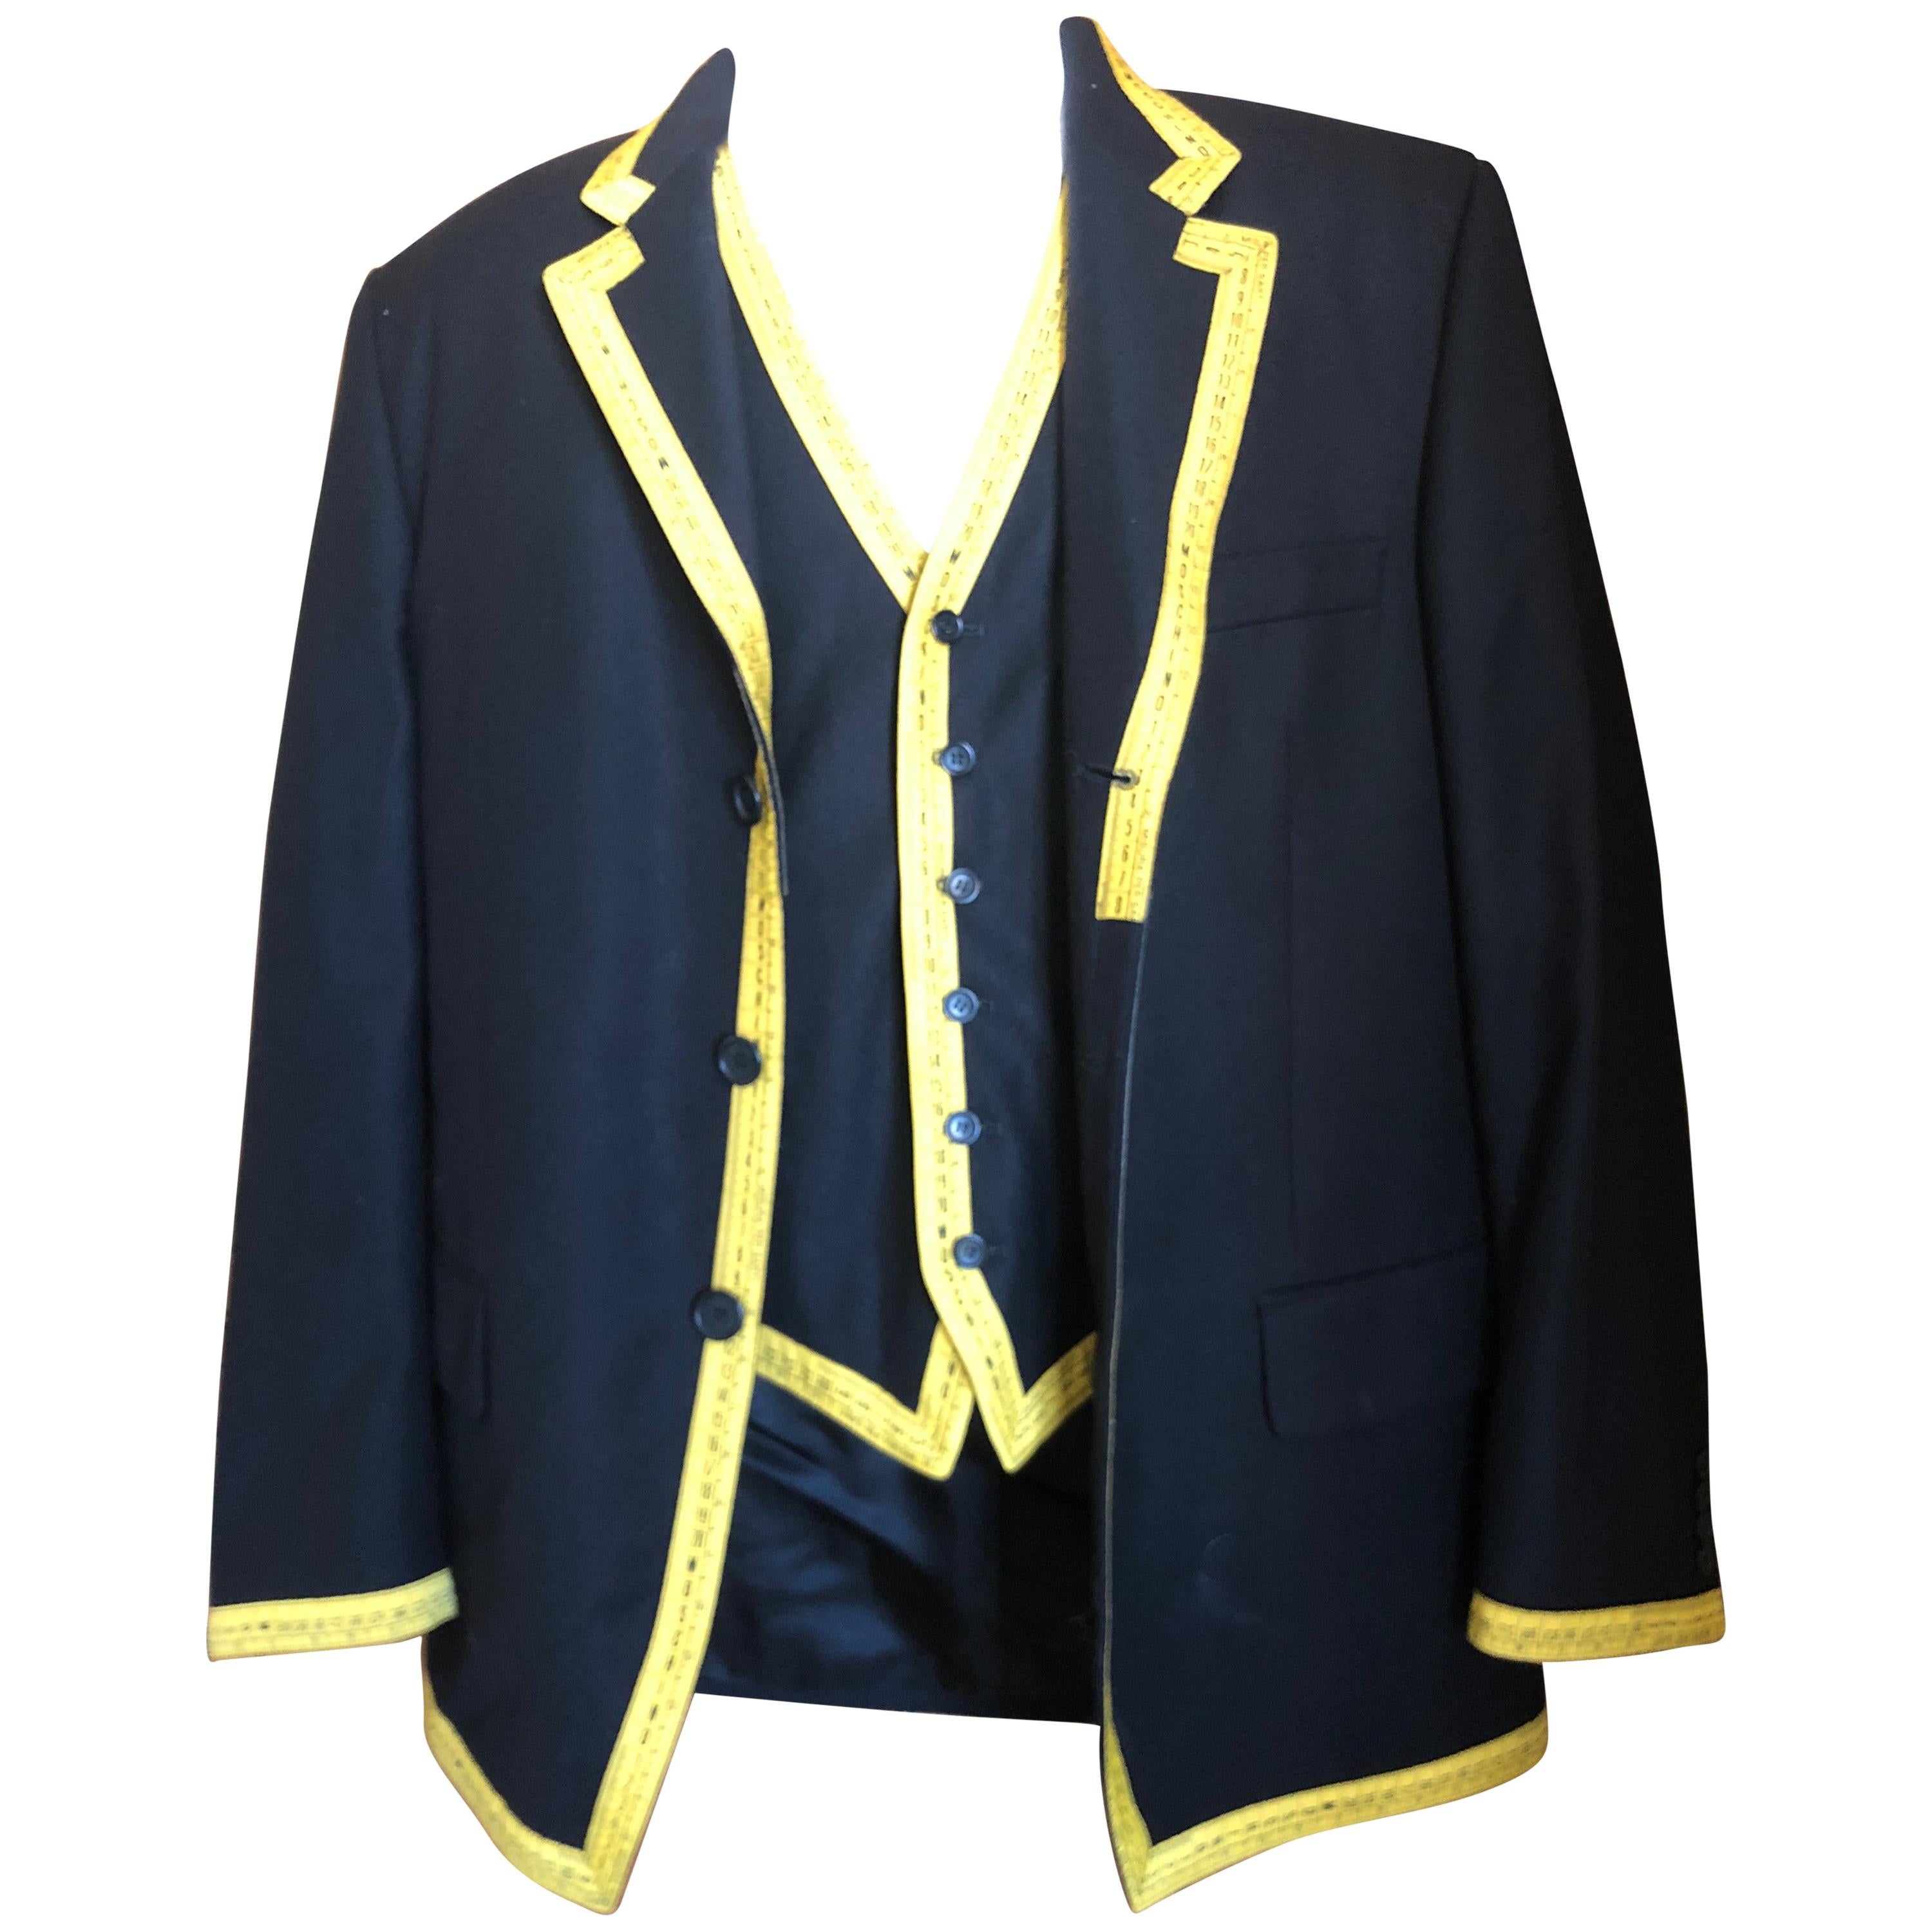 Moschino 1989 Cheap & Chic Iconic Vintage Mens Tape Measure Jacket and Vest For Sale